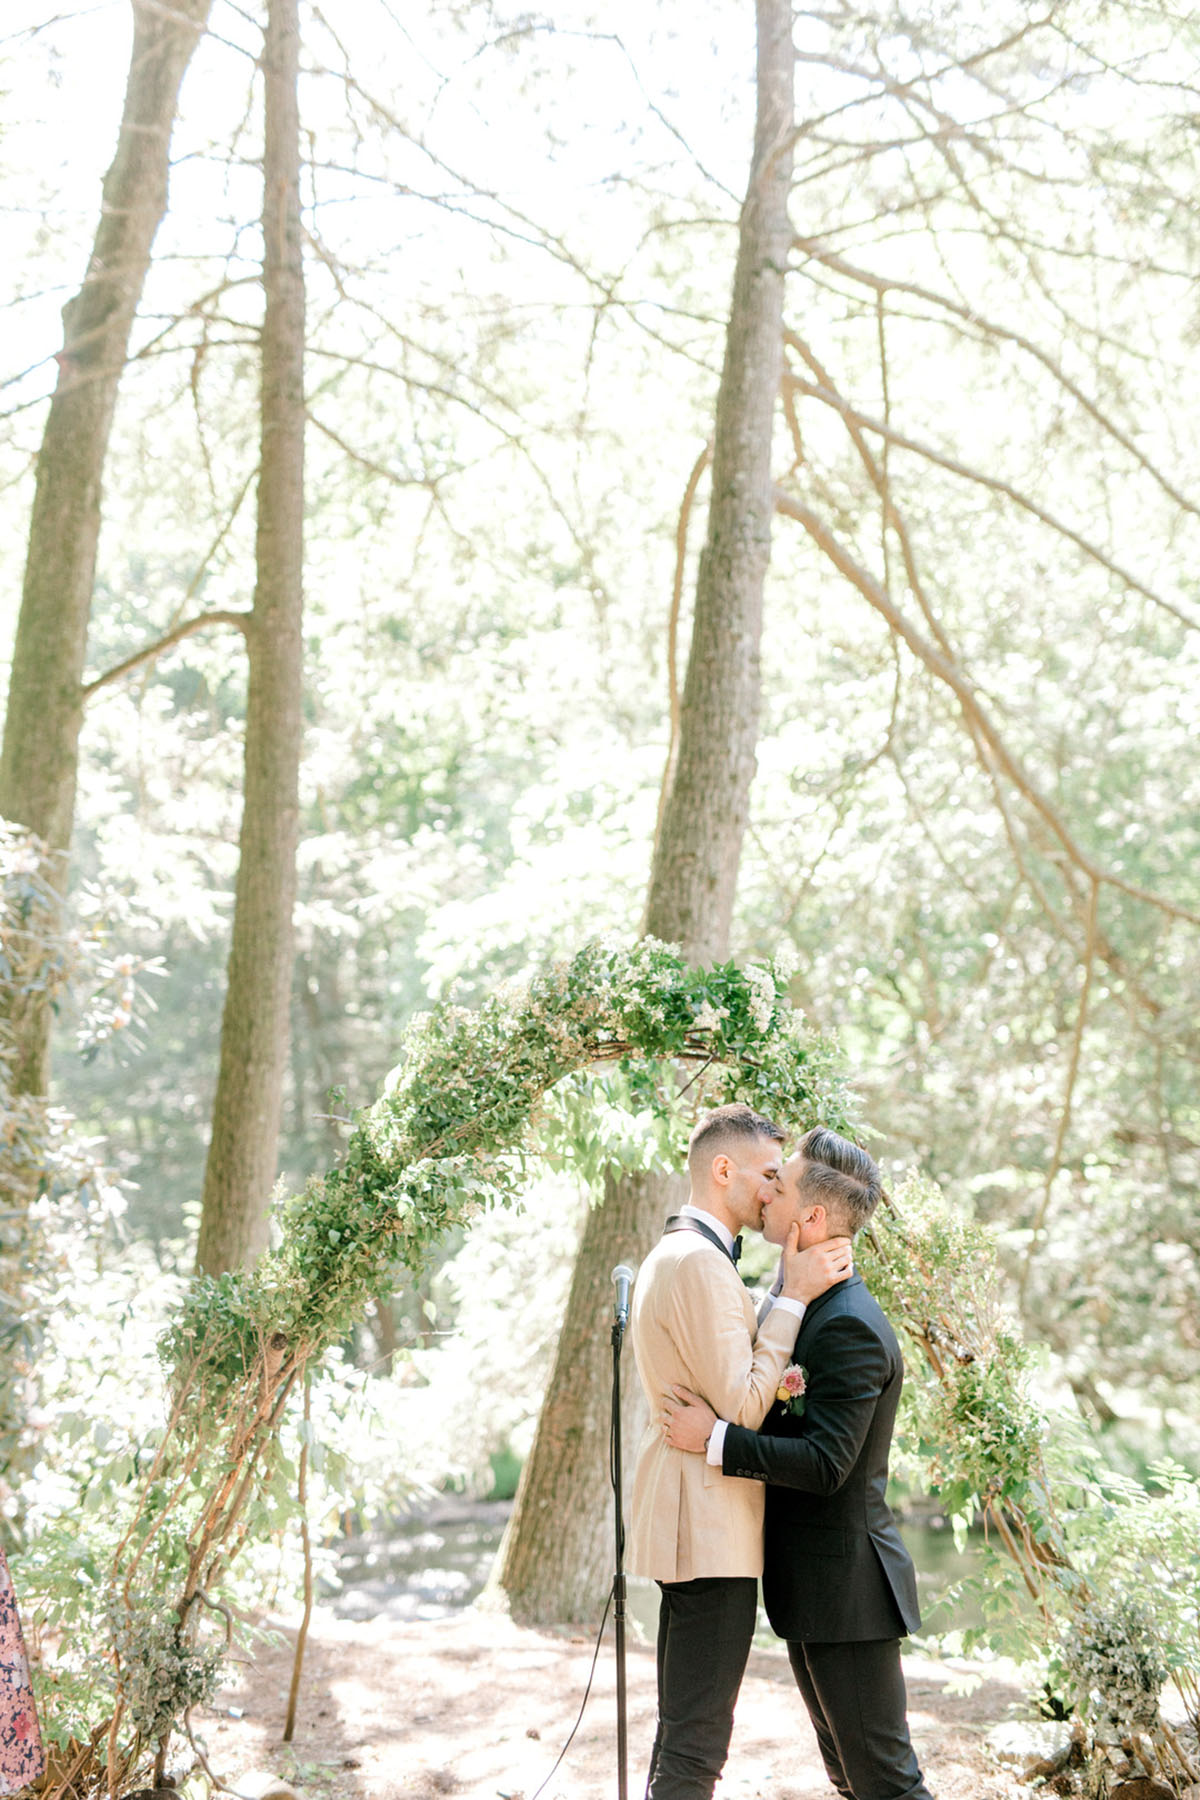 Intimate summer wedding in the woods surrounded by nature two grooms black tux tan tux matching bow ties kiss